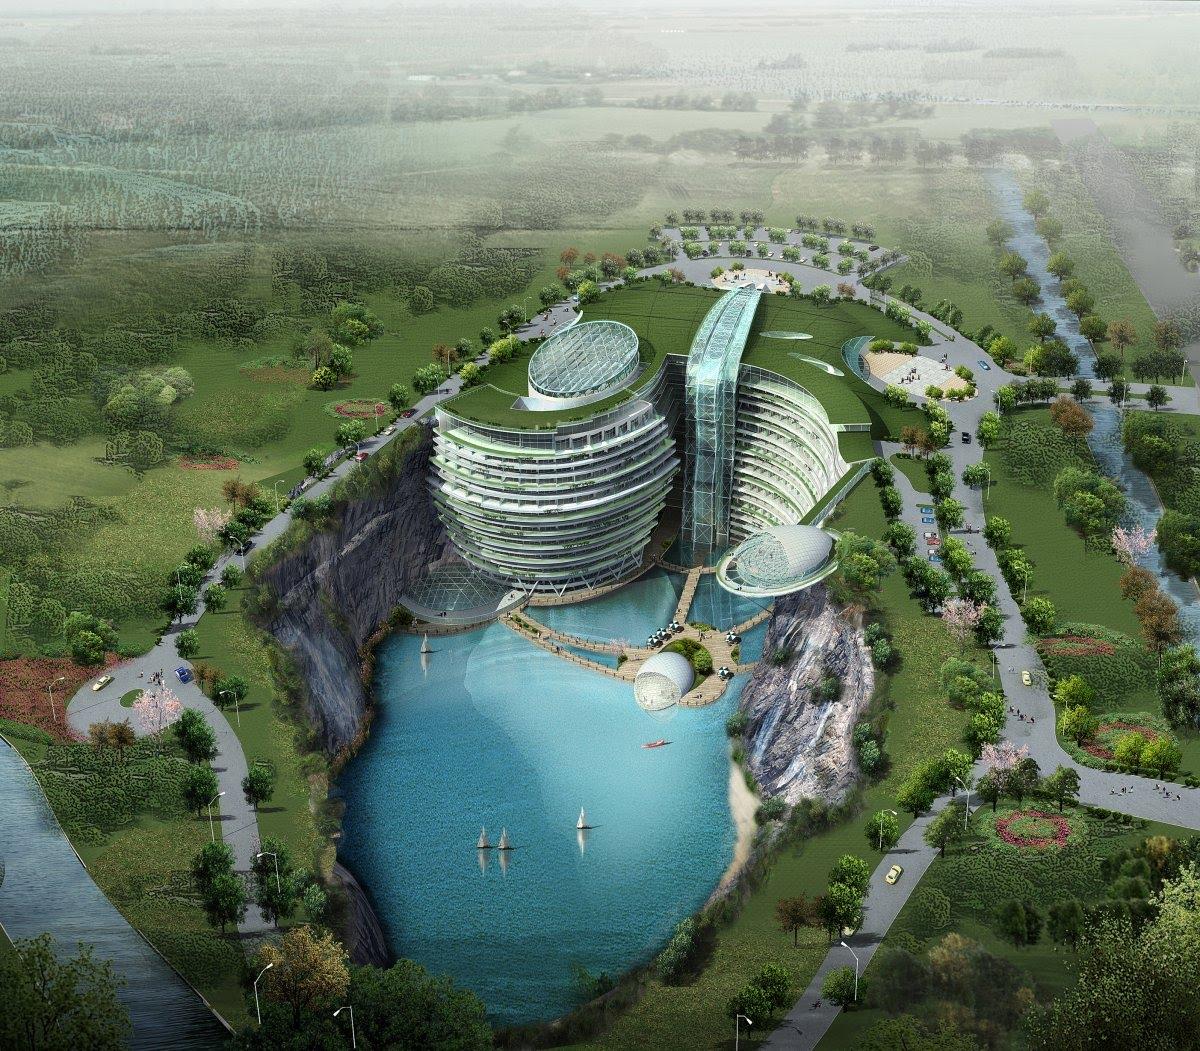 The hotel could accommodate upwards of 500,000 guests per year. / Courtesy of JADE+QA 